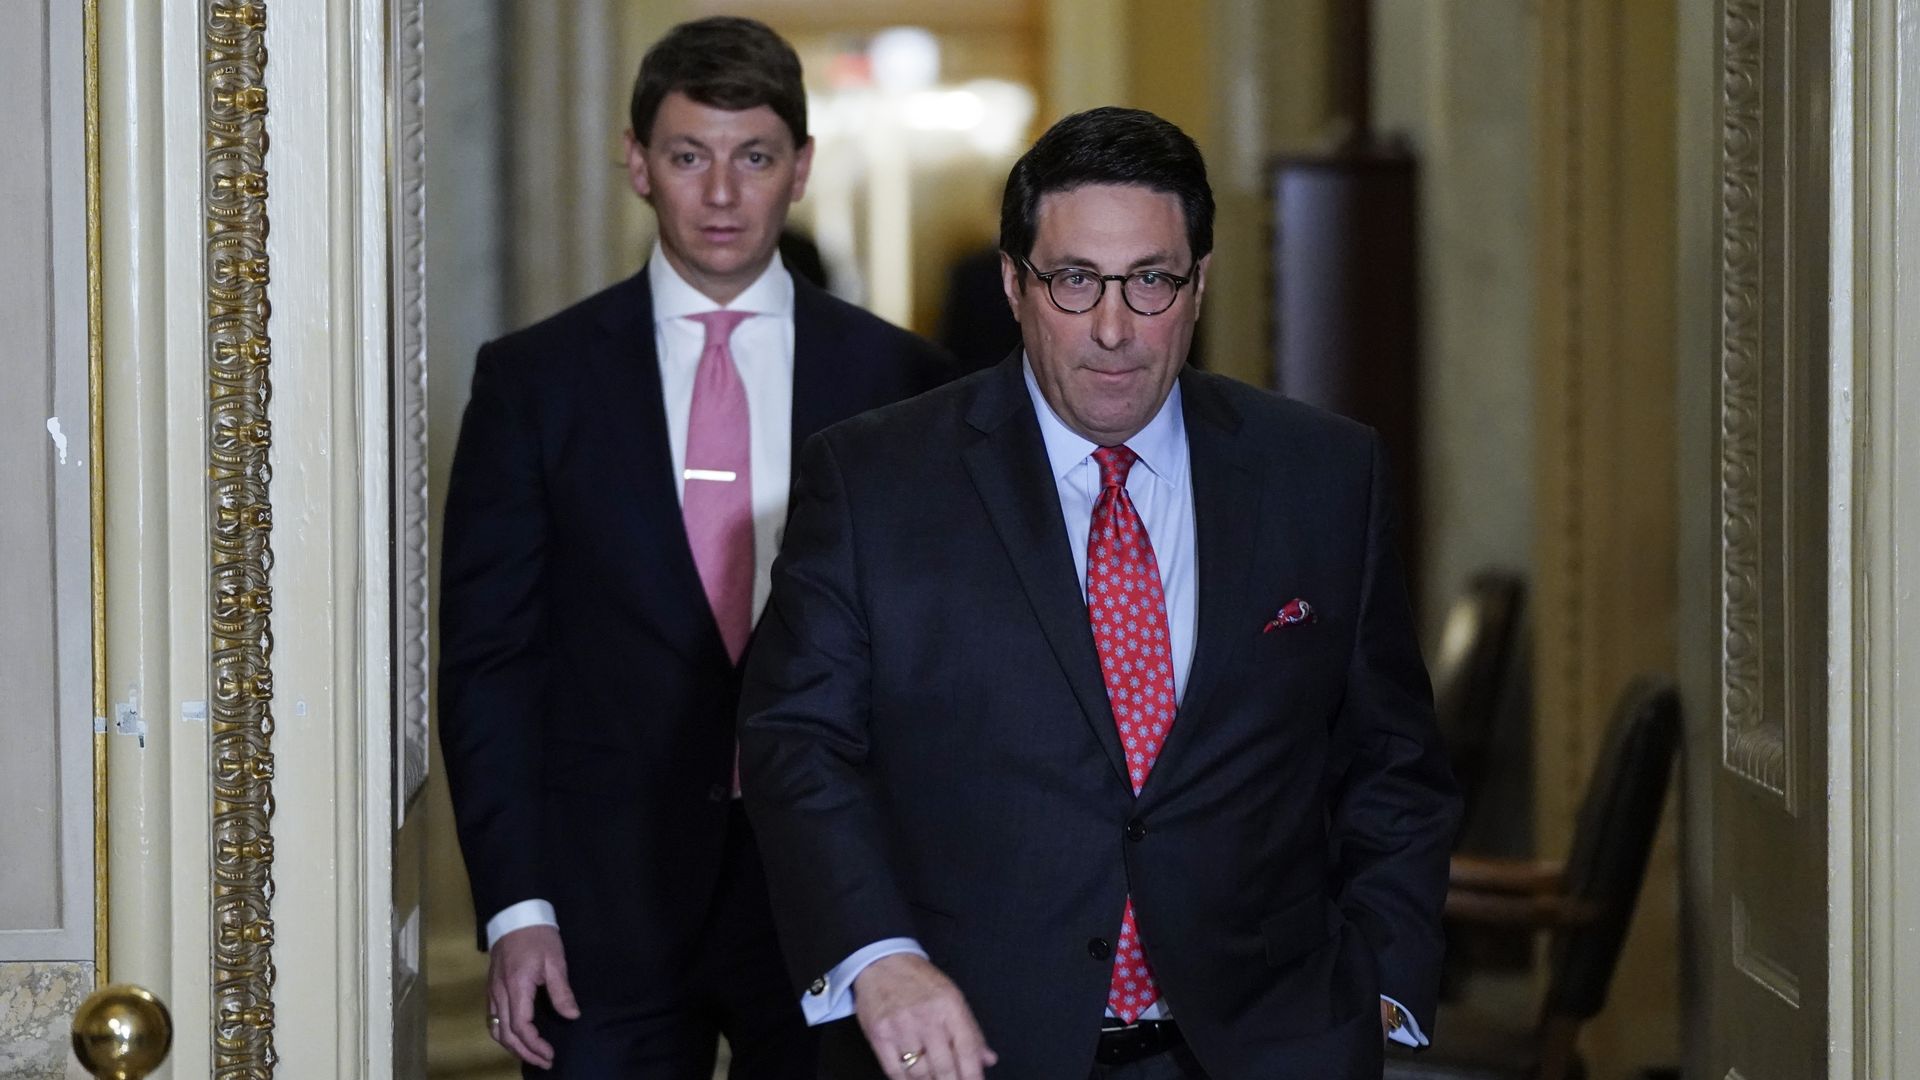 White House Deputy Press Secretary Hogan Gidley walks behind Trump's personal lawyer Jay Sekulow in the Capitol on Thursday evening at Trump's impeachment trial.